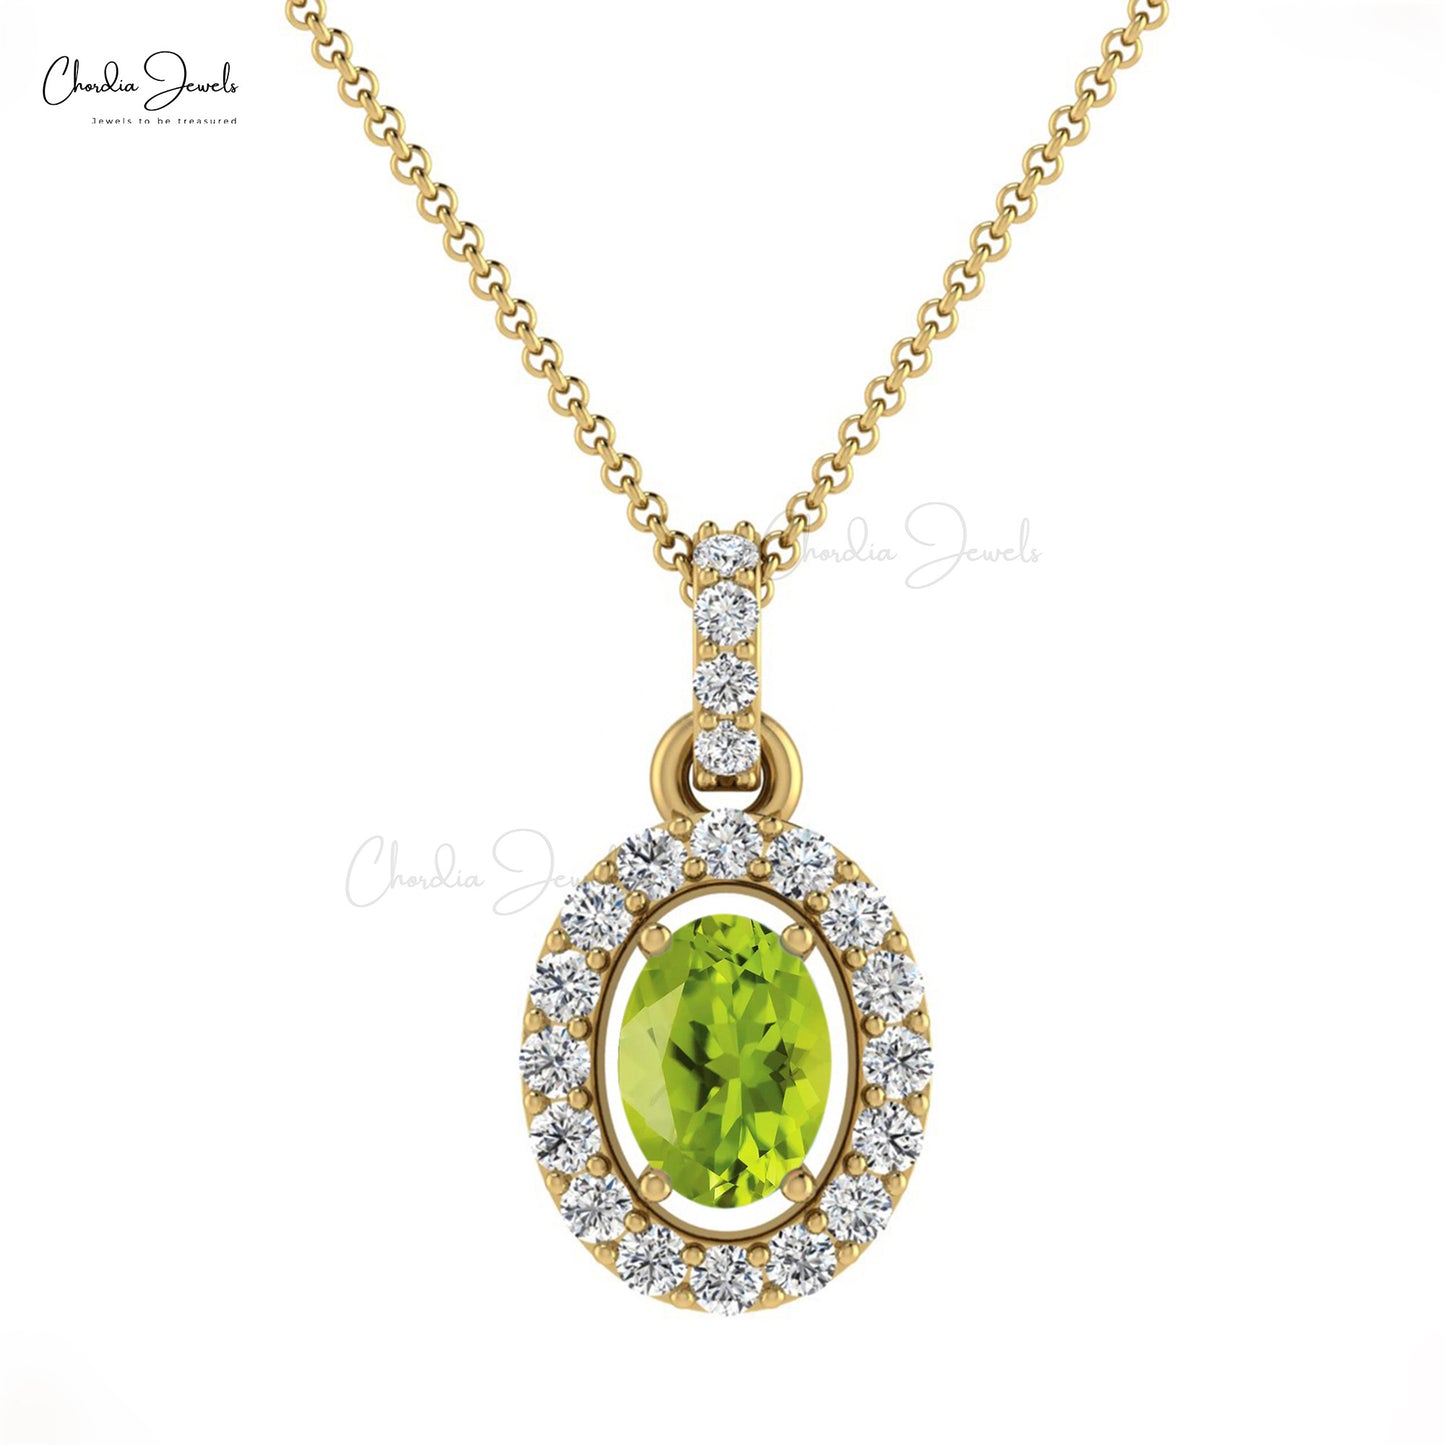 Natural Peridot and Diamond Pendant, 14k Solid Gold Gemstone Pendant, 7x5mm Oval Gemstone Prong Set Pendant Gift for Wife